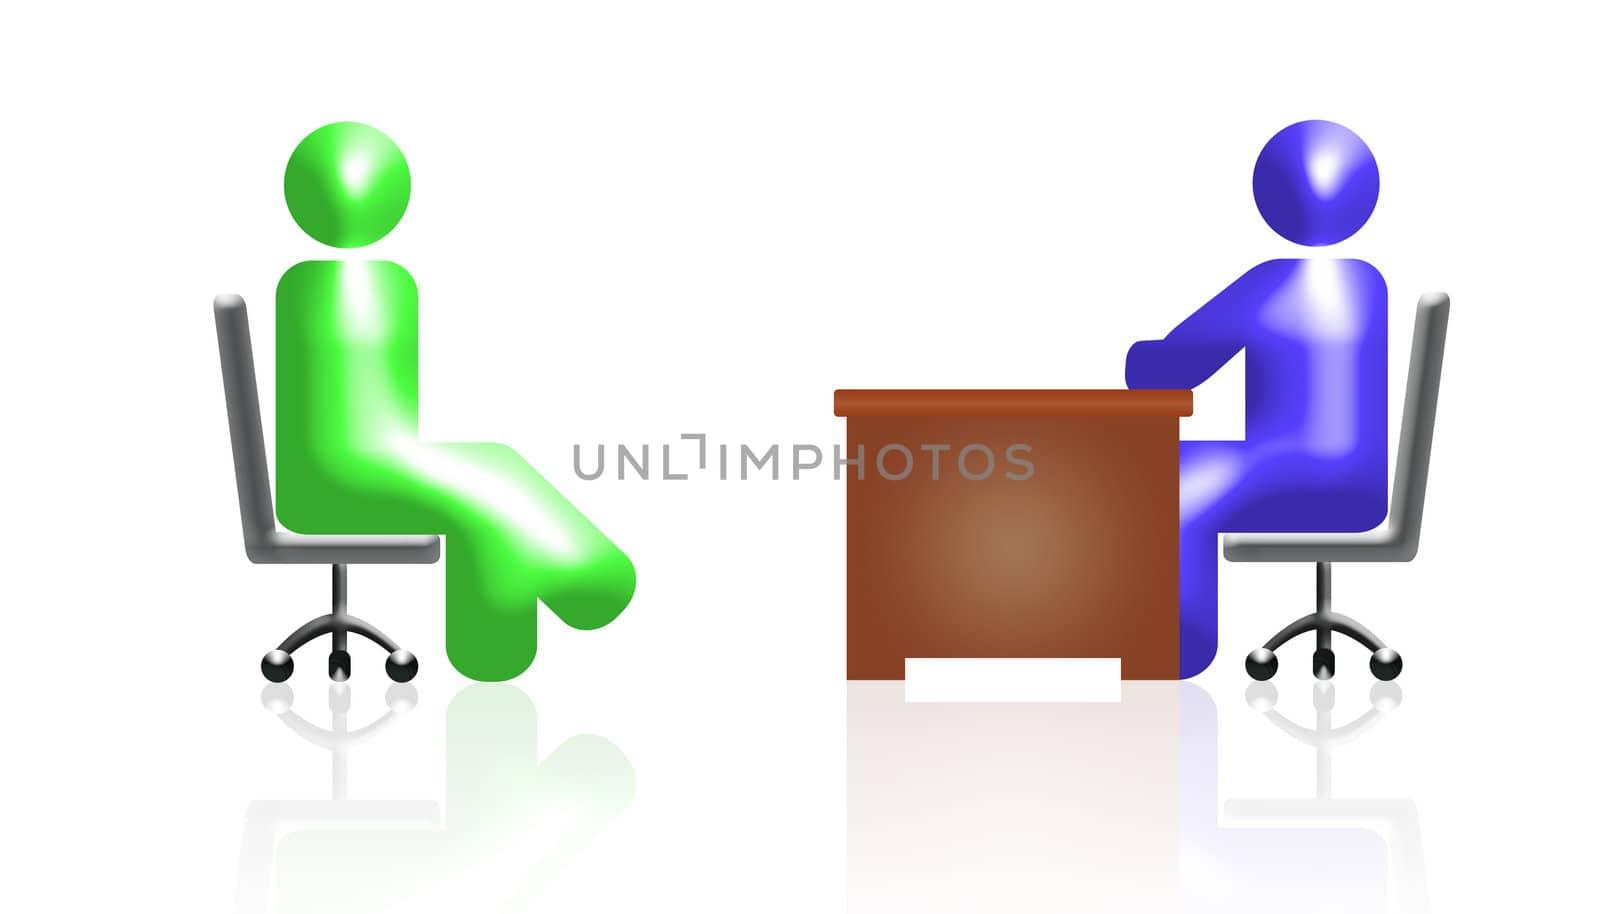 two icons of businessmen in the work situation.
white background and reflection